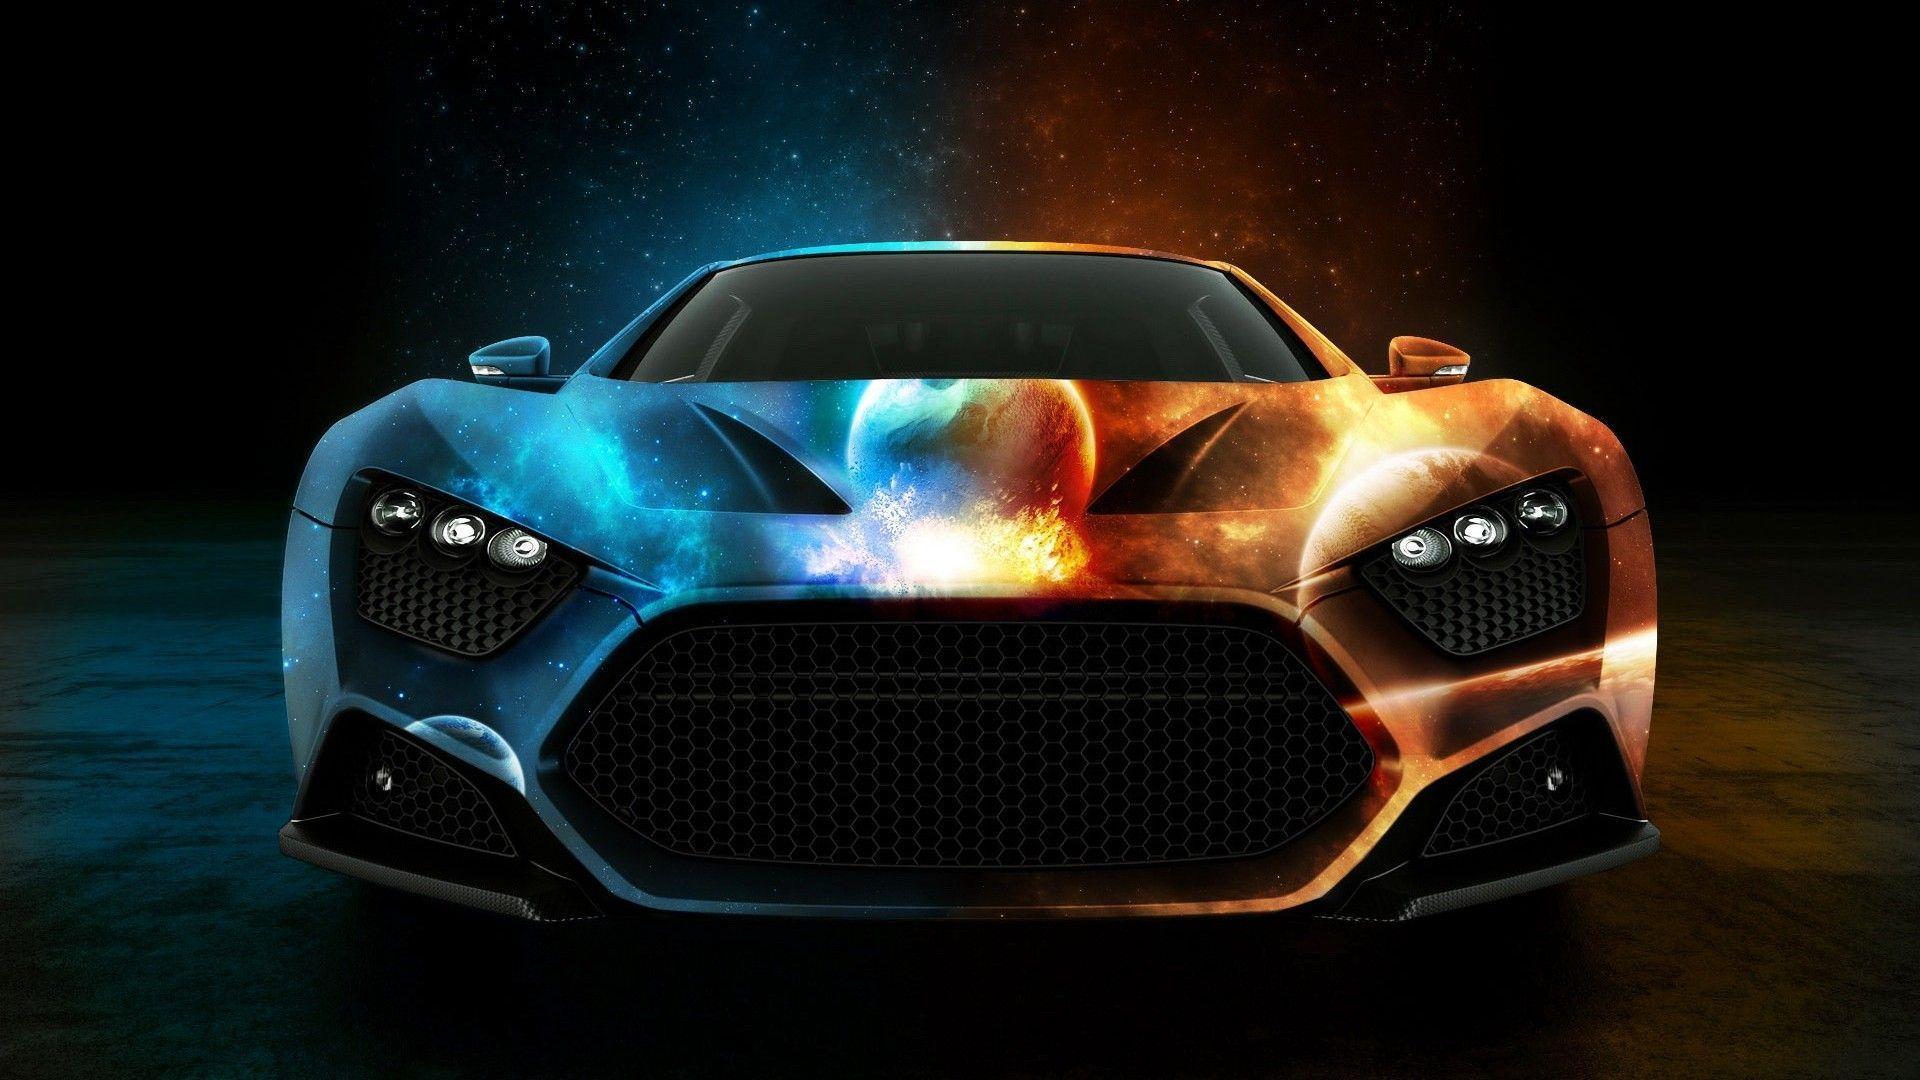 Wallpapers For > Cool Car Wallpapers 1920x1080